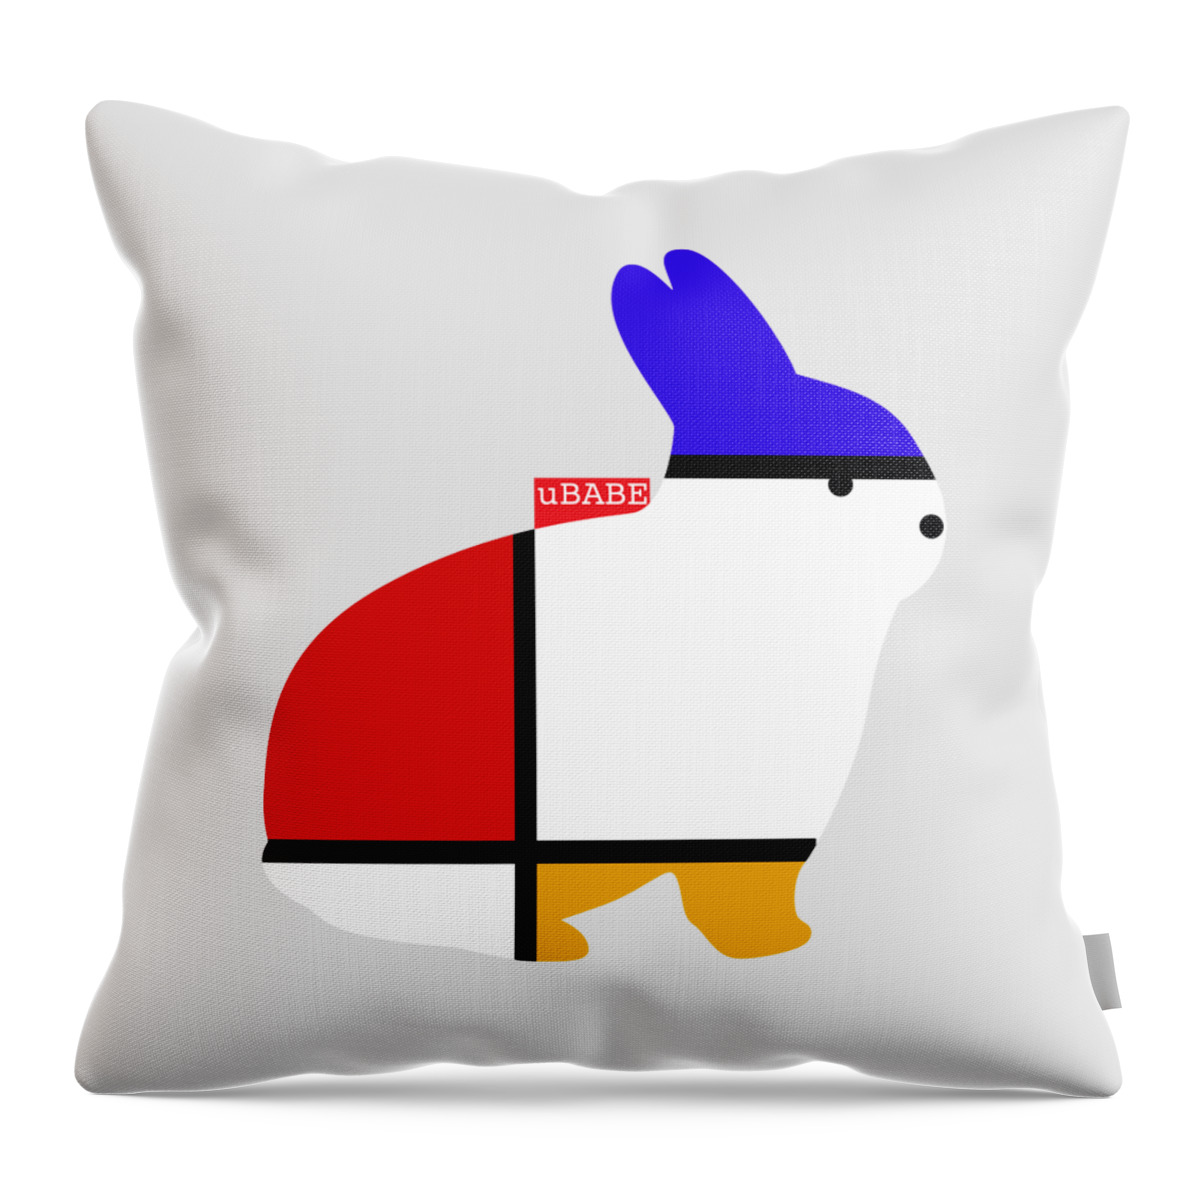 Modern White Rabbit Throw Pillow featuring the digital art Modern White by Ubabe Style